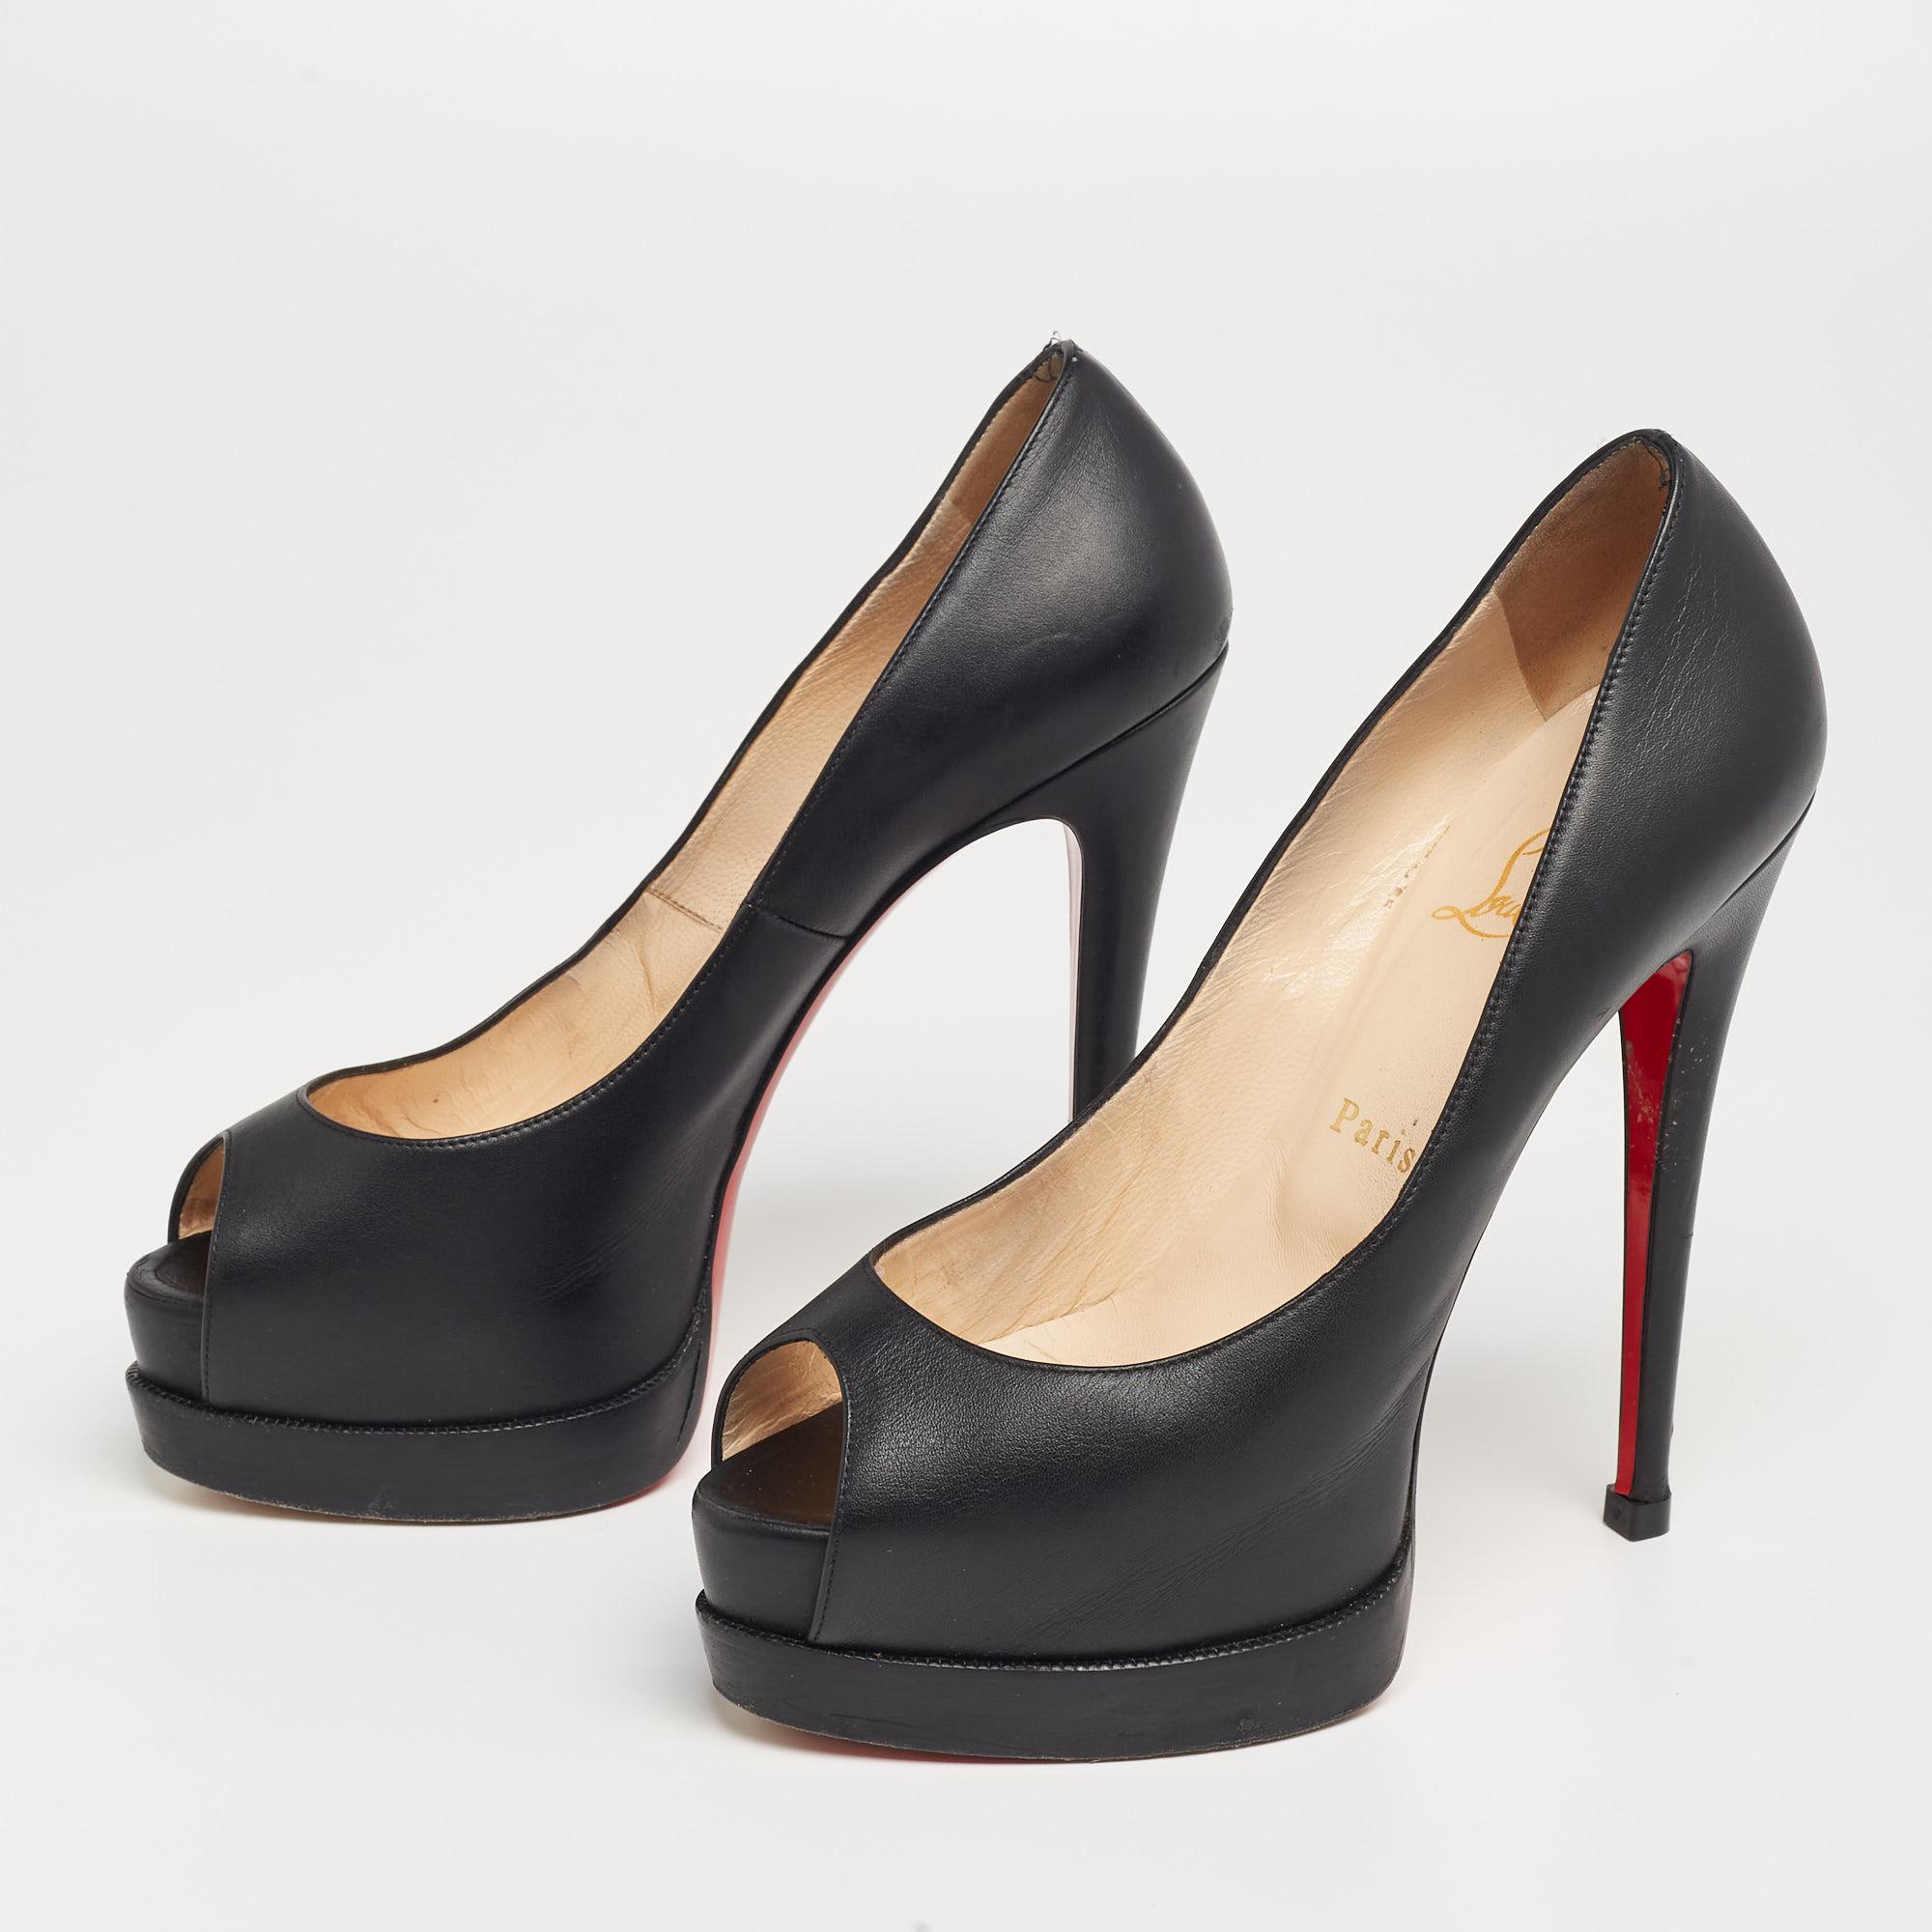 Crafted from black leather, this pair of pumps from the house of Christian Louboutin has been designed to add a classy update to your look. Platforms, peep-toes, and 14 cm heels make this pair a great choice.

